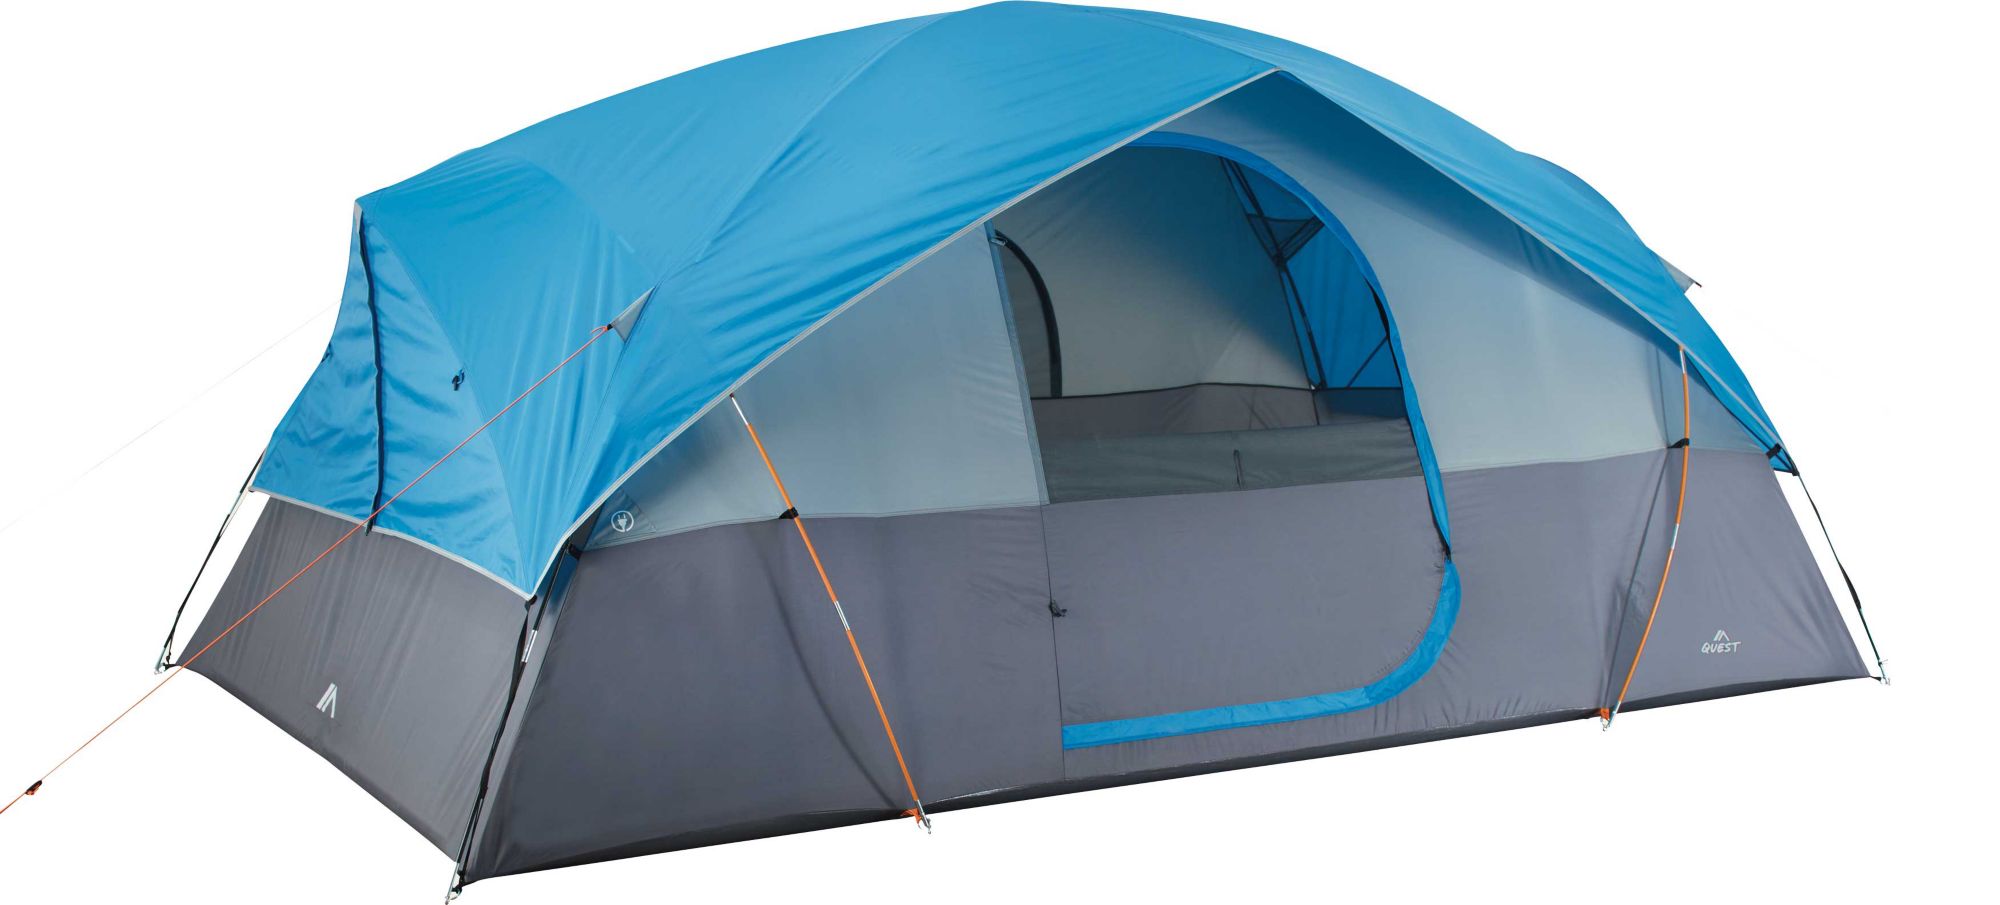 Dick's - 8-Person Cross Vent Dome Tent $90 + Free Shipping $89.99